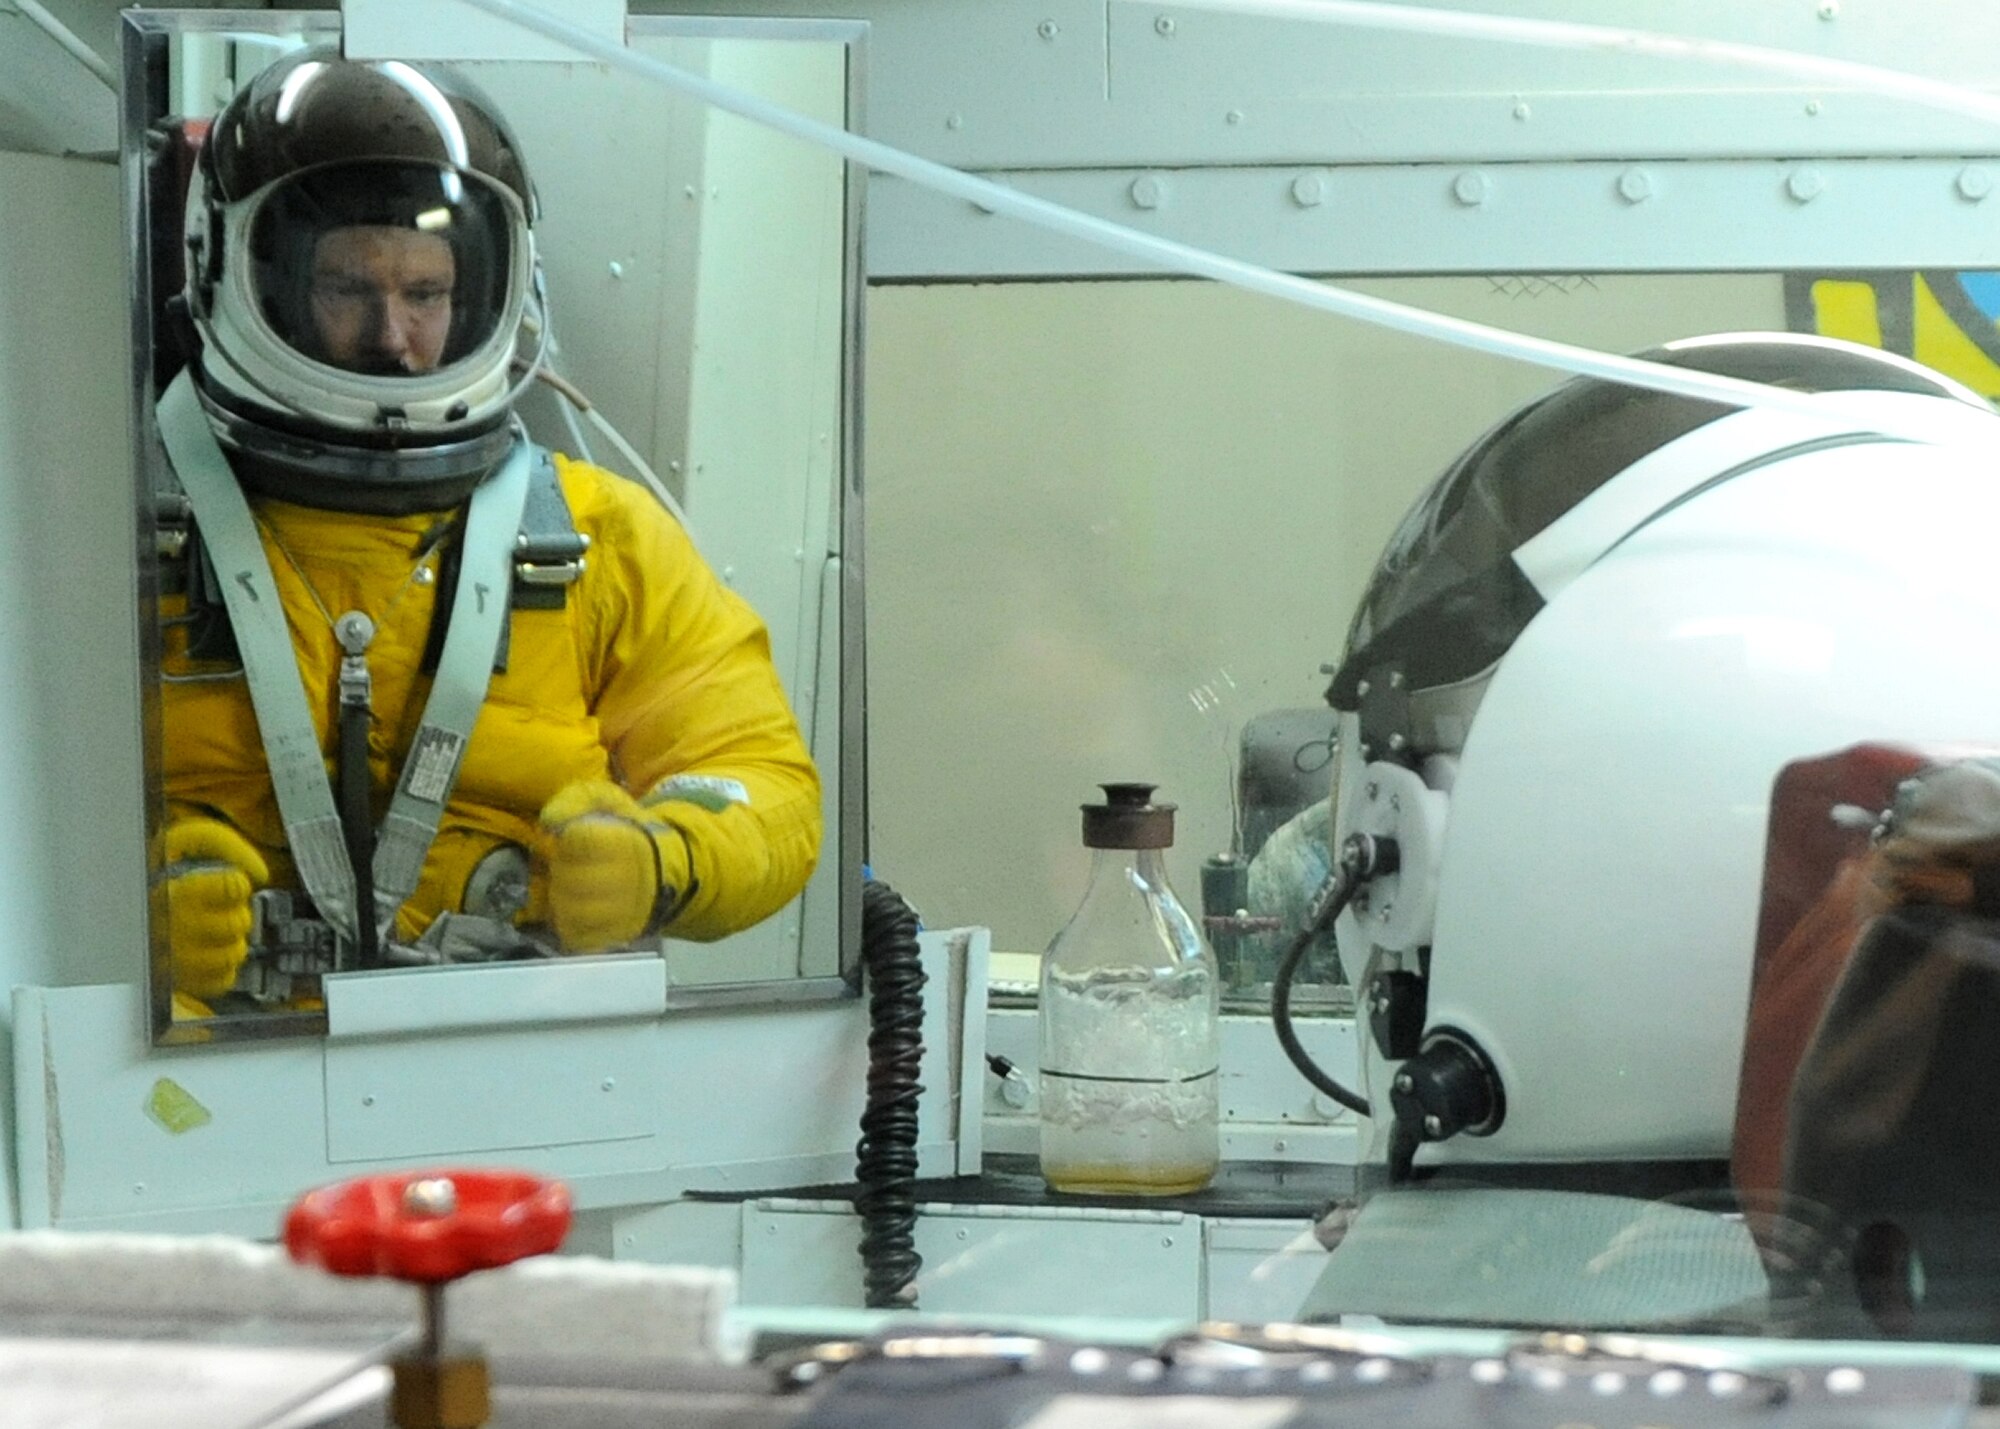 Gen. William M. Fraser III, commander of Air Combat Command, looks in the mirror as he tenses up while ascending in the high-altitude chamber at Beale Air Force Base, Calif., Jan. 10. The ascent to 70,000 feet causes the pressure suit to inflate, keeping the body at an altitude of 35,000 feet. (U.S. Air Force photo/9th Reconnaissance Wing Public Affairs)